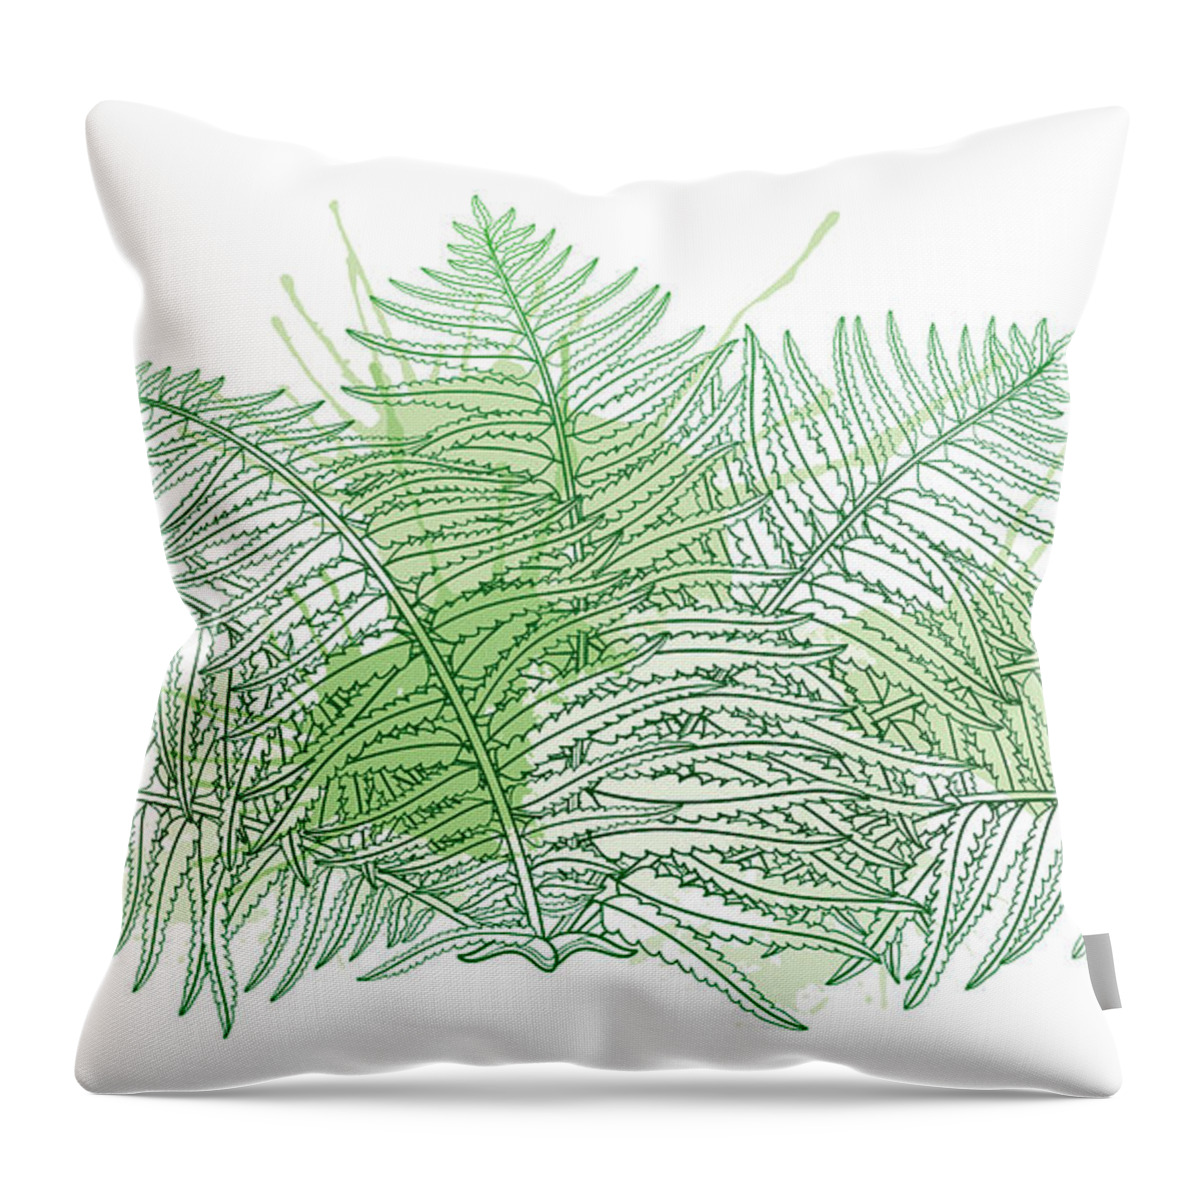 Season Throw Pillow featuring the digital art Vector Drawing Of Outline Fossil Forest by Bokasana